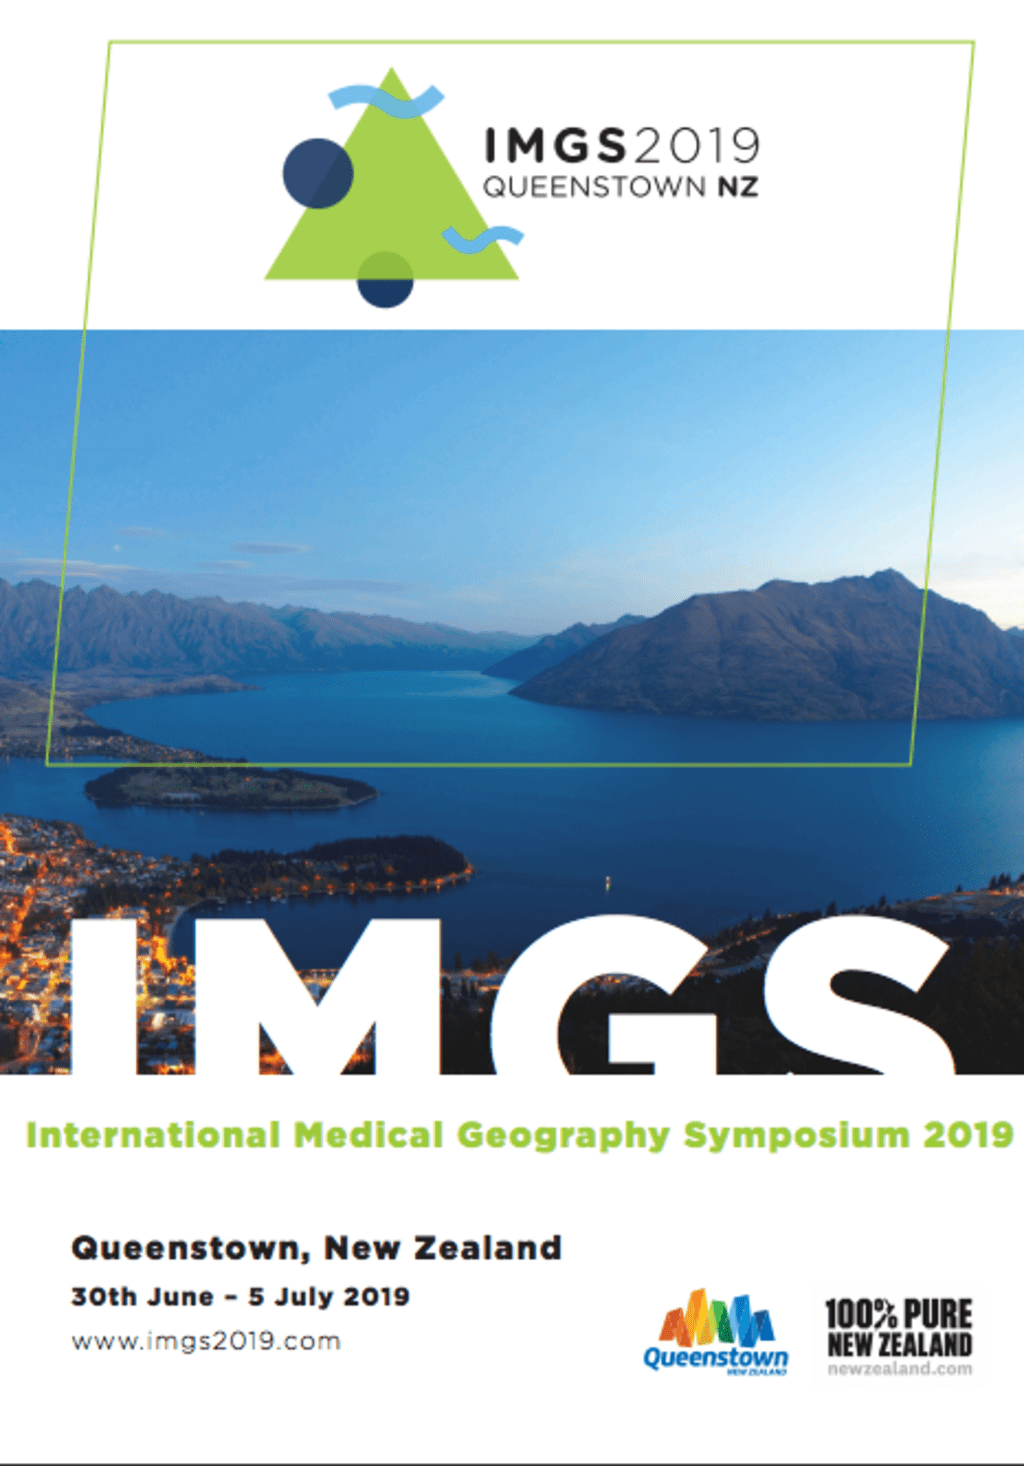 IMGS conference 2019 announcement 